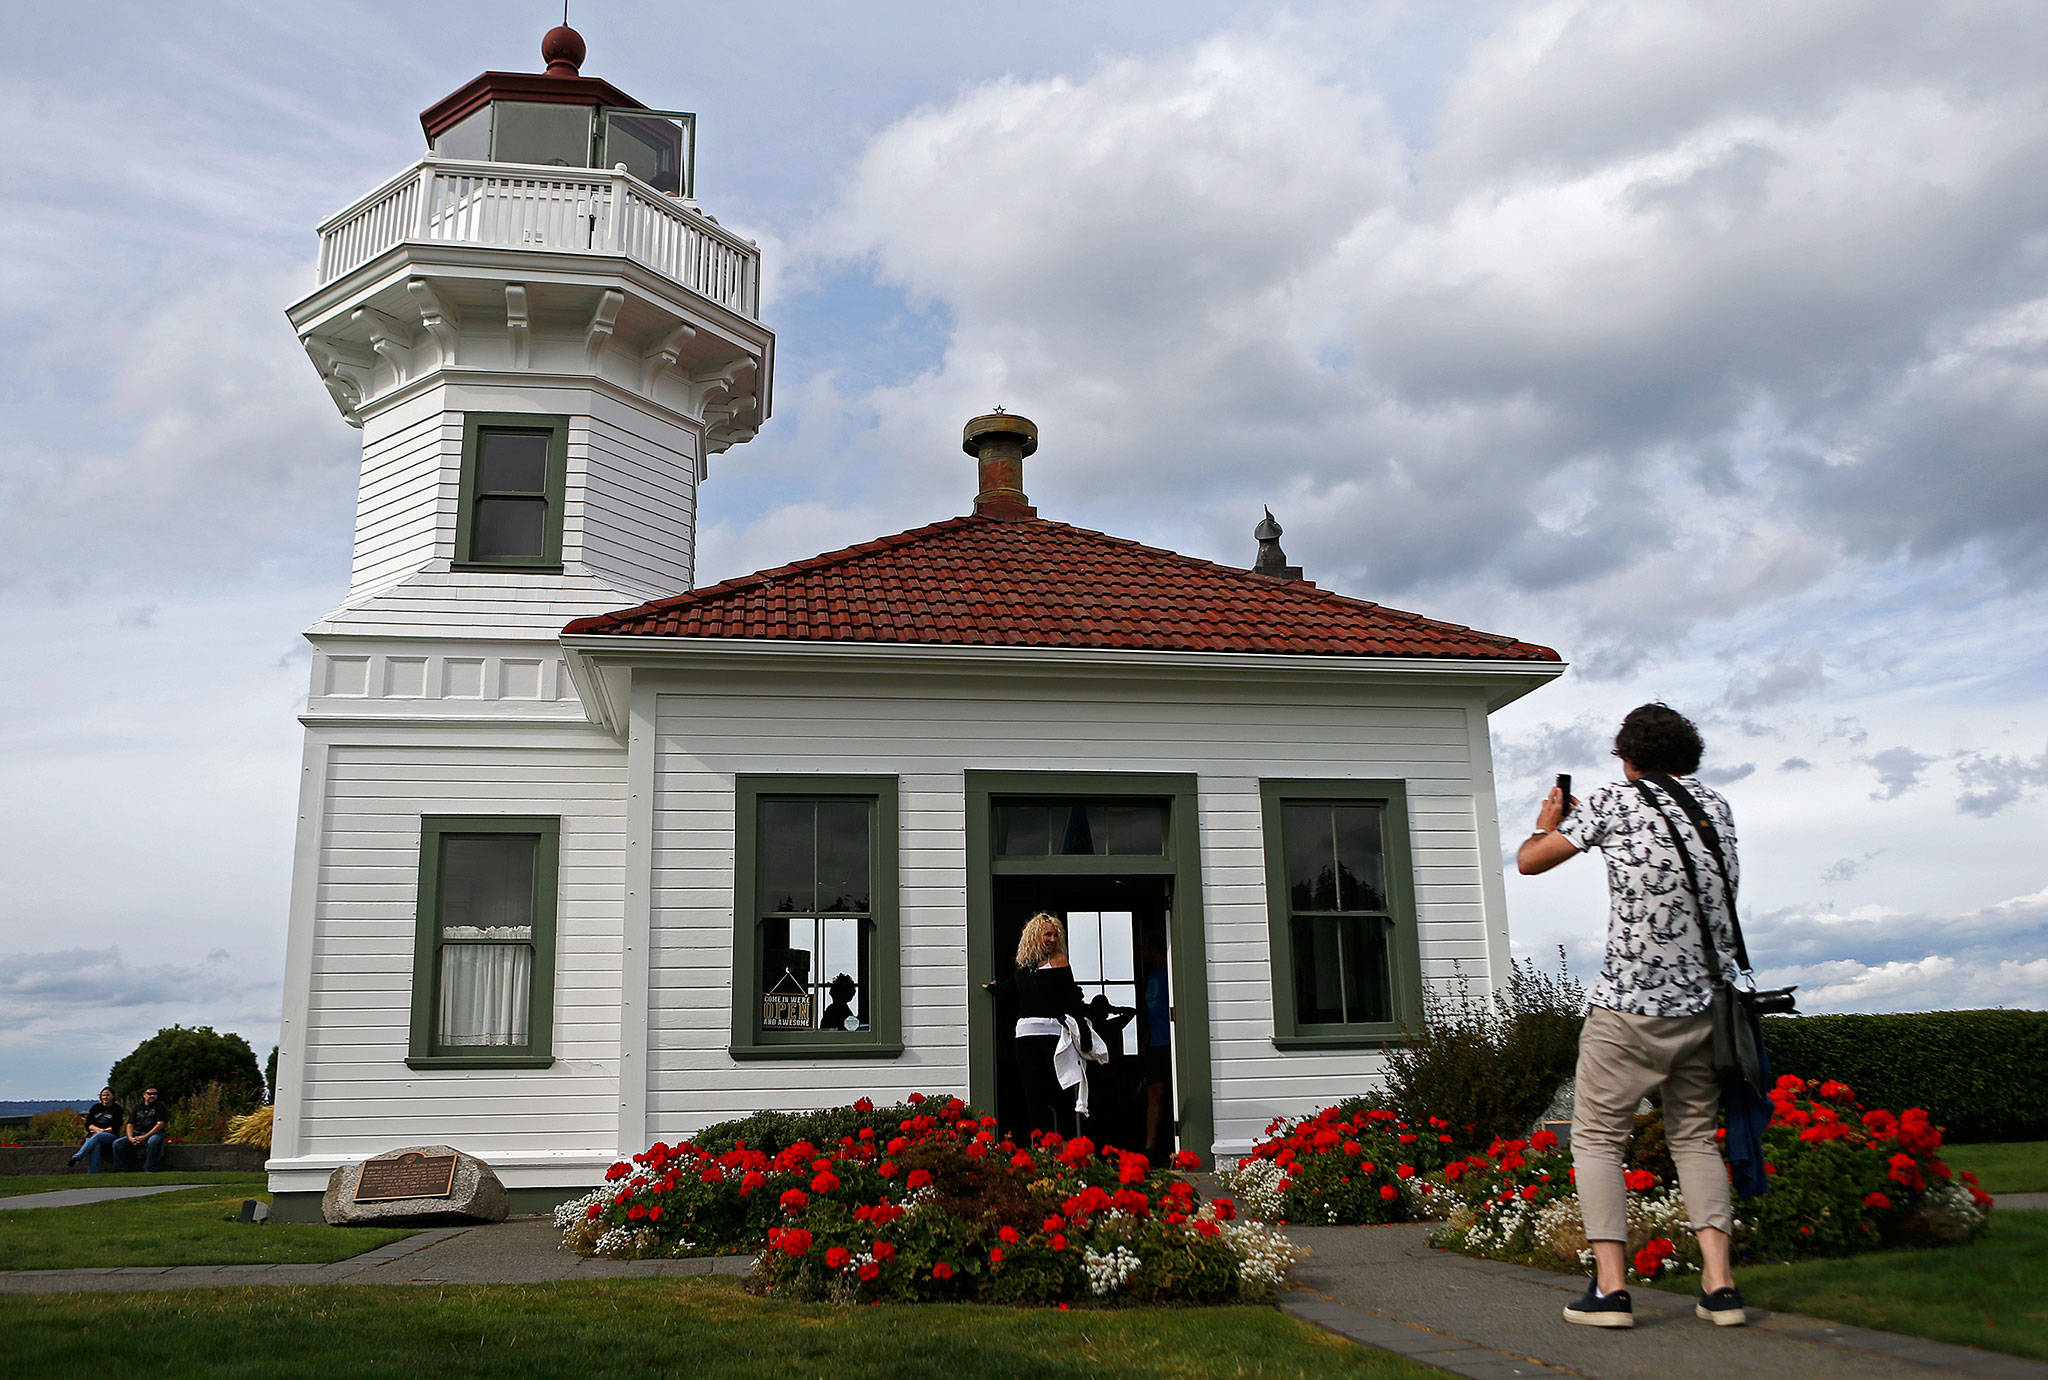 A couple takes a photo in front of the Mukilteo Lighthouse. The lighthouse, built in 1906, is one of the most iconic landmarks in all of Snohomish County. (Olivia Vanni / The Herald)